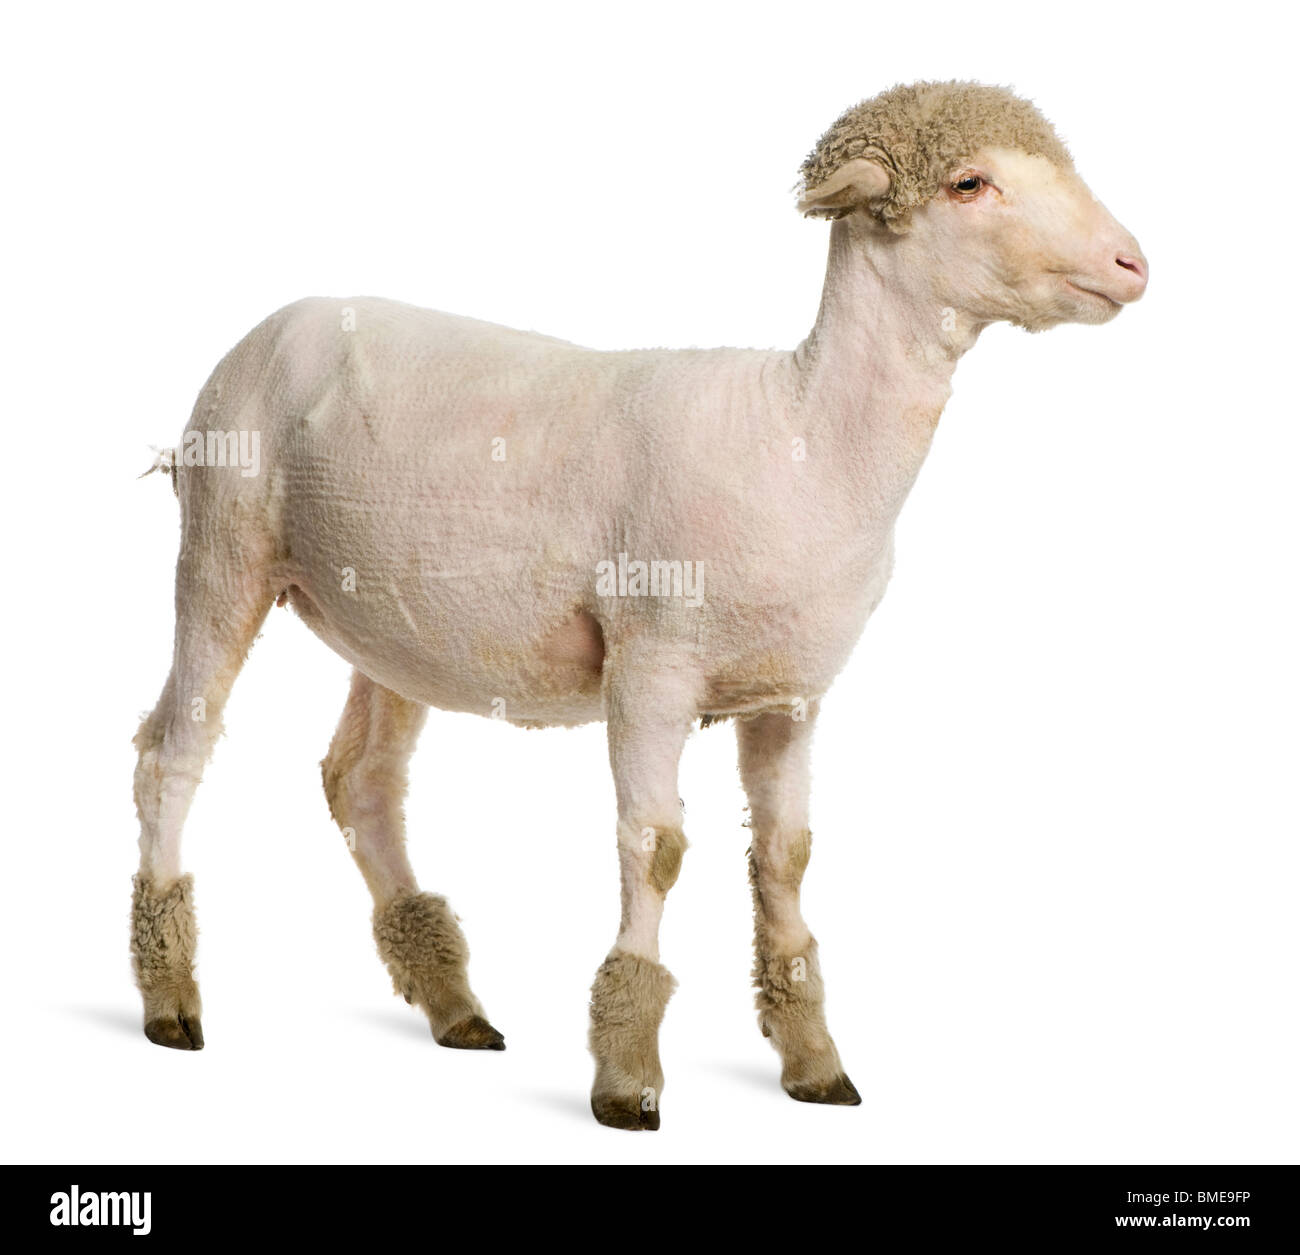 Partially shaved Merino lamb, 4 months old, in front of white background Stock Photo